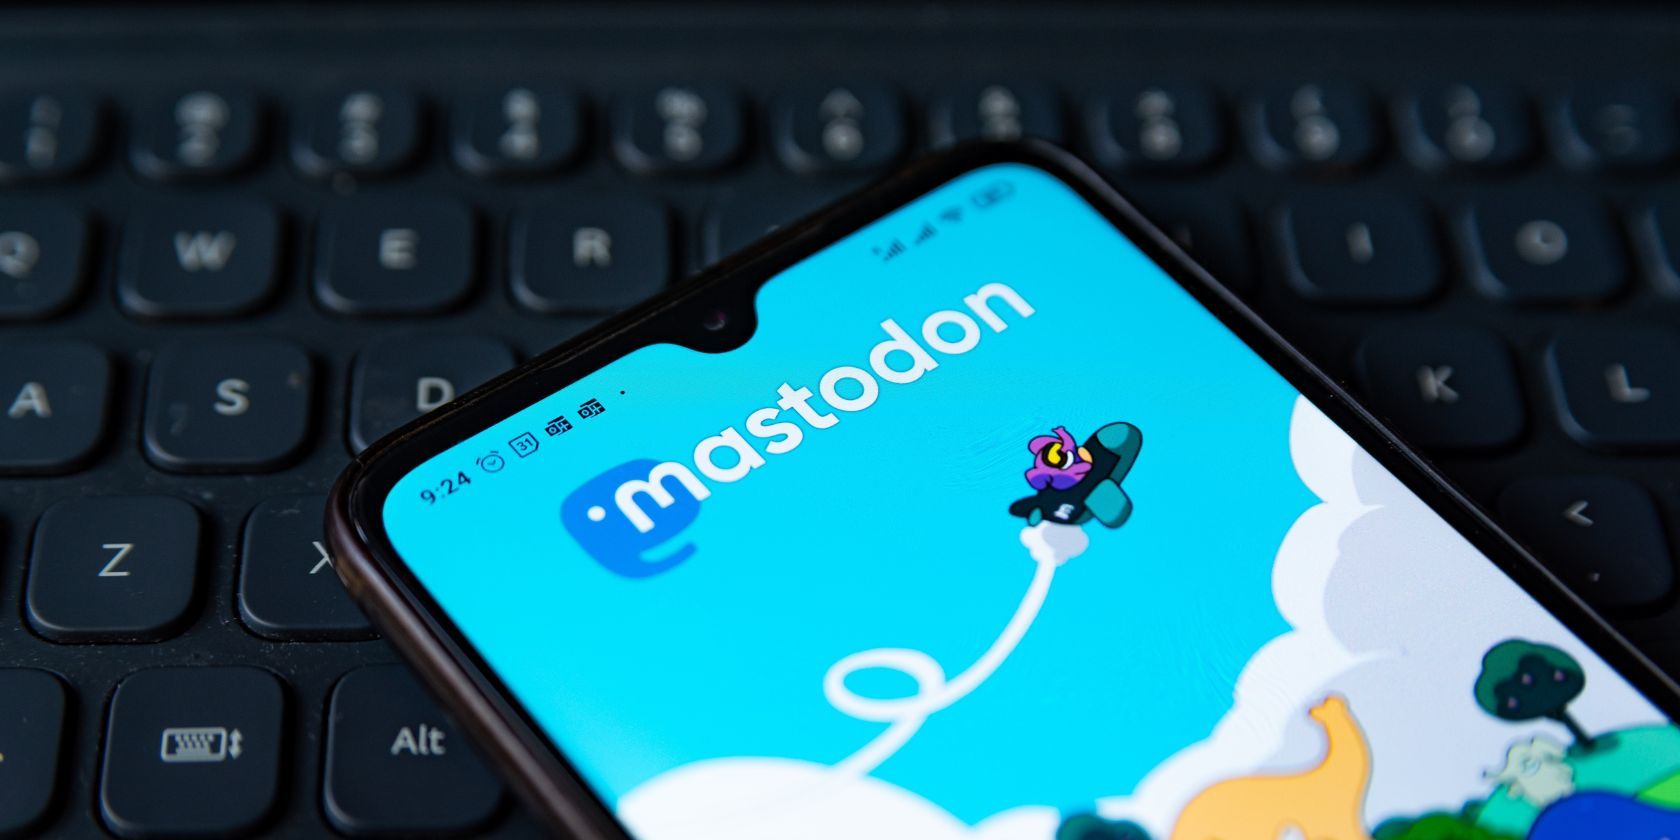 mastodon on a smartphone, with a keyboard in the background